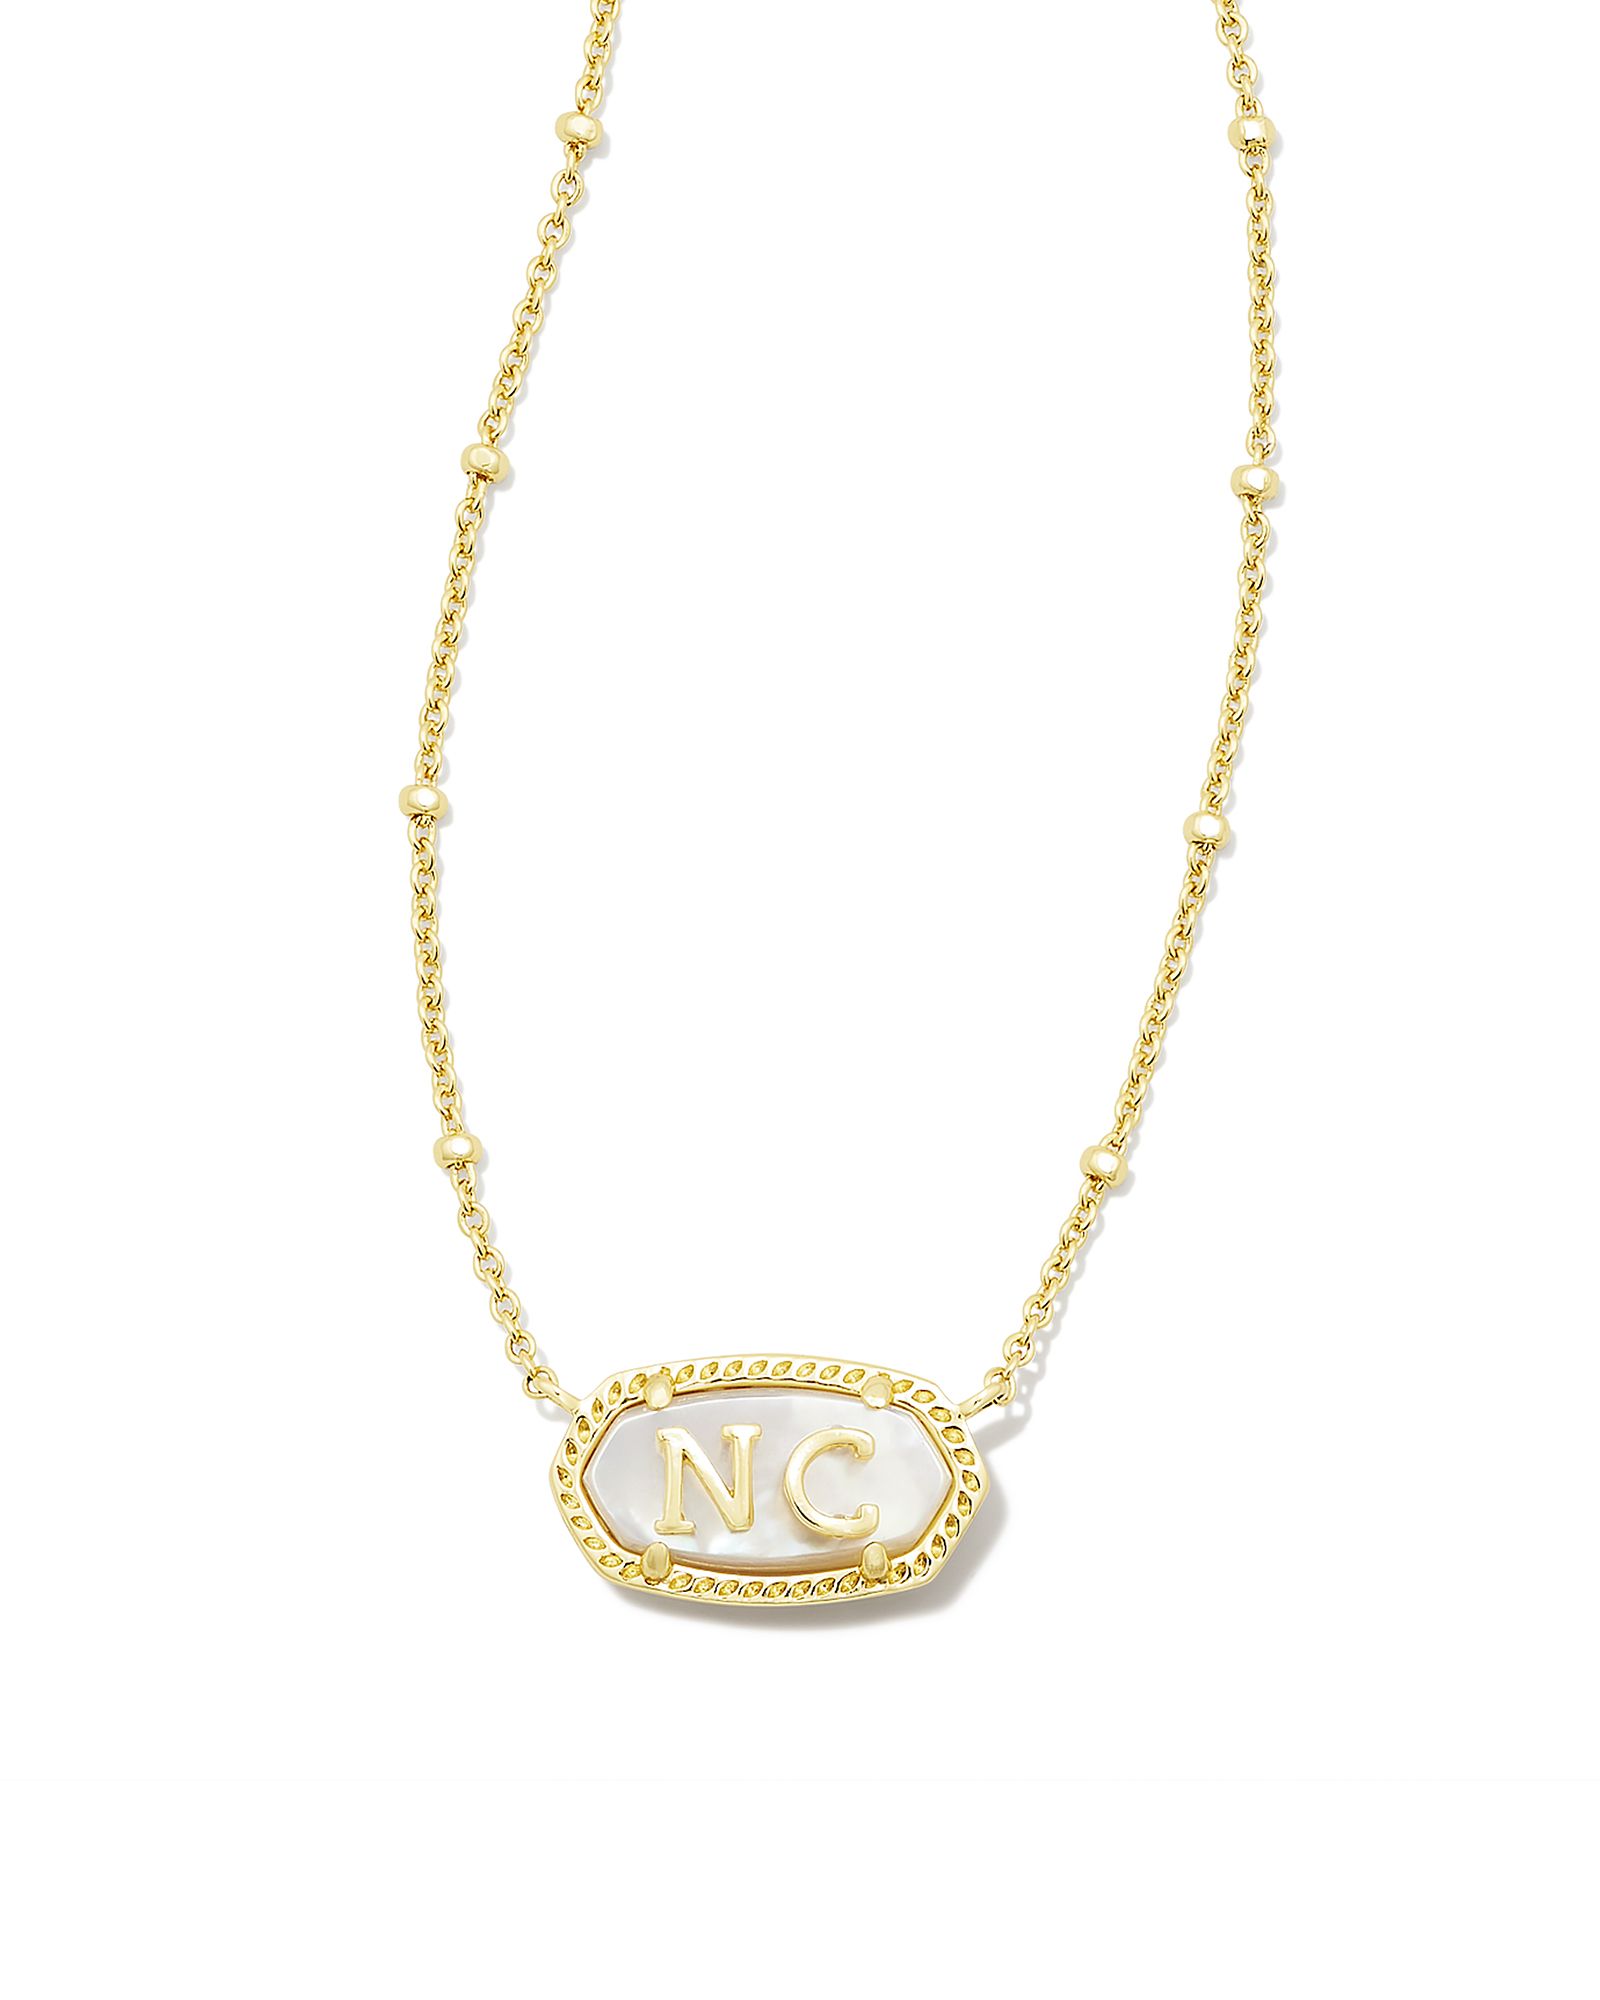 Elisa Gold North Carolina Necklace in Ivory Mother-of-Pearl | Kendra Scott